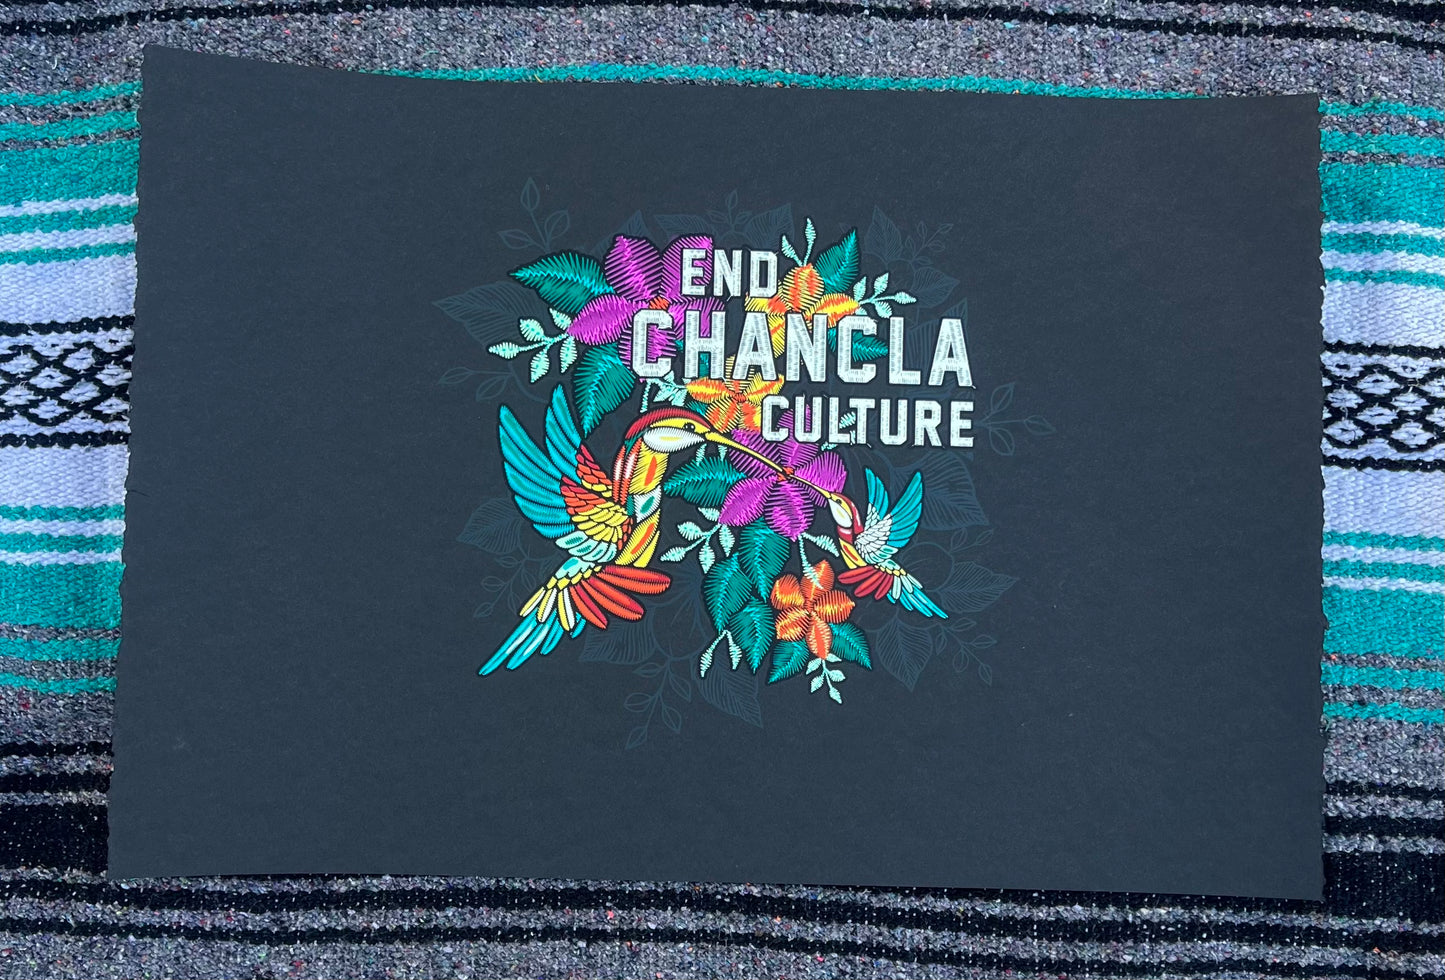 Limited Edition *Signed* Print - Ending Chancla Culture